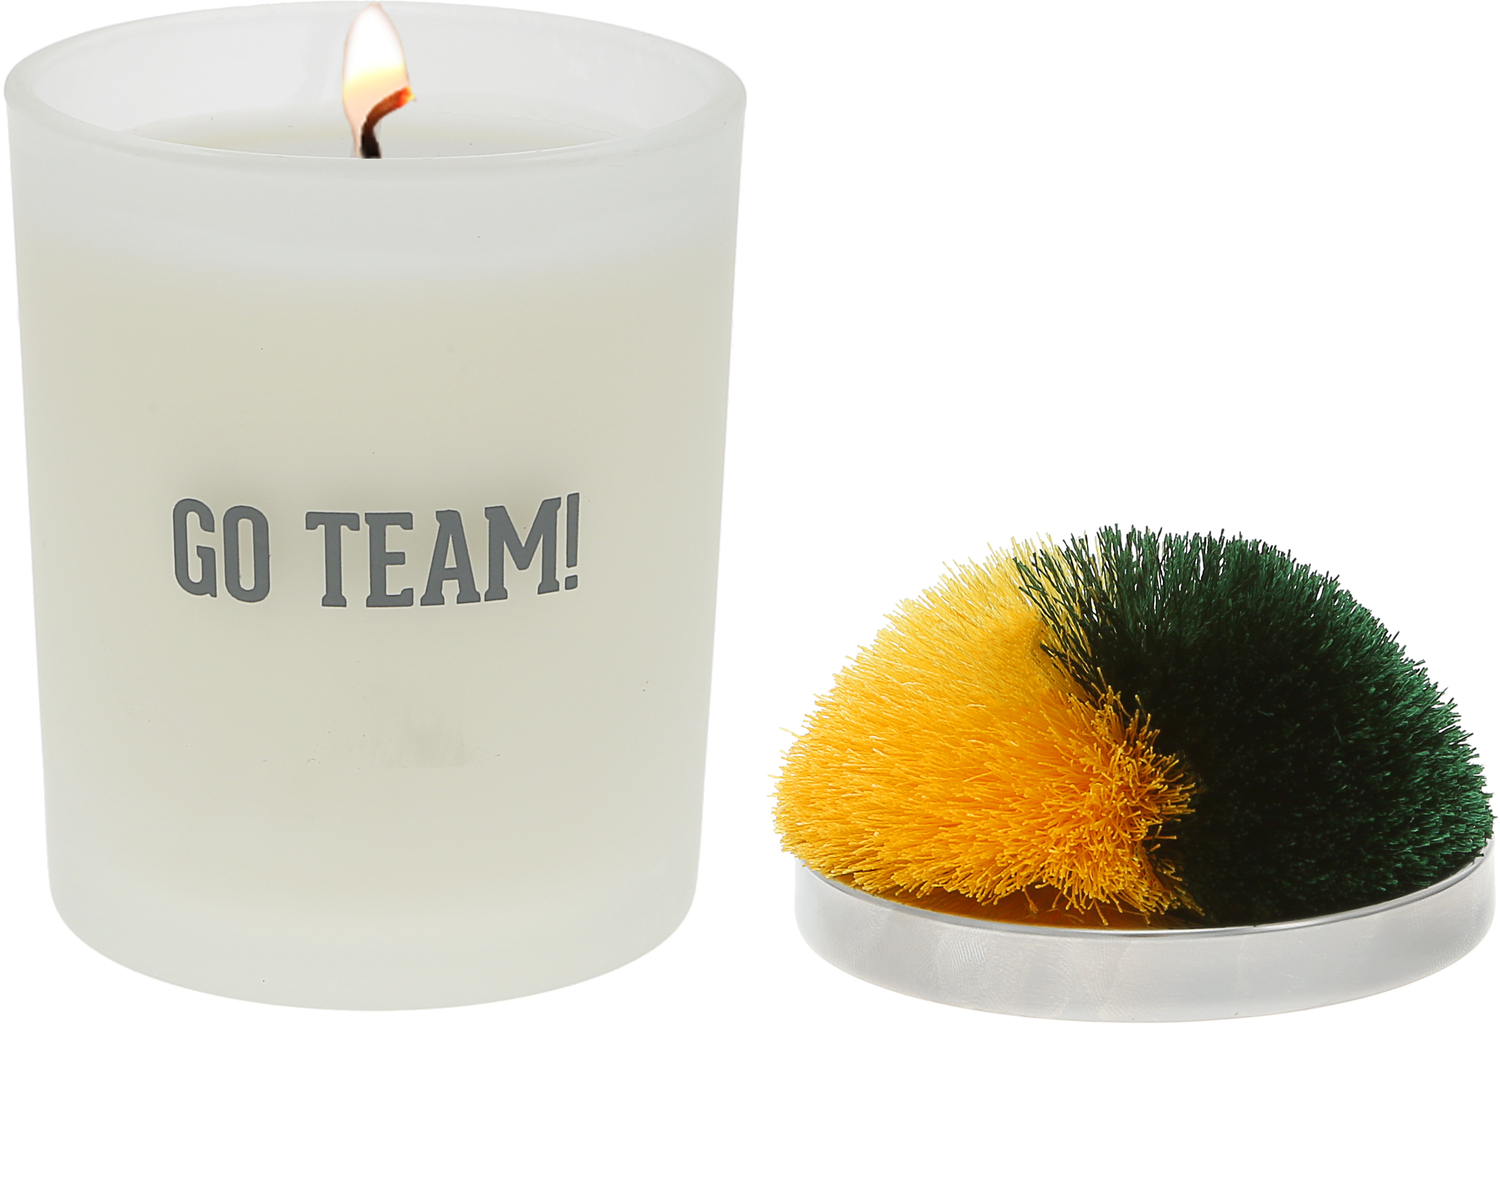 Go Team! - Green & Yellow by Repre-Scent - Go Team! - Green & Yellow - 5.5 oz - 100% Soy Wax Candle with Pom Pom Lid
Scent: Tranquility